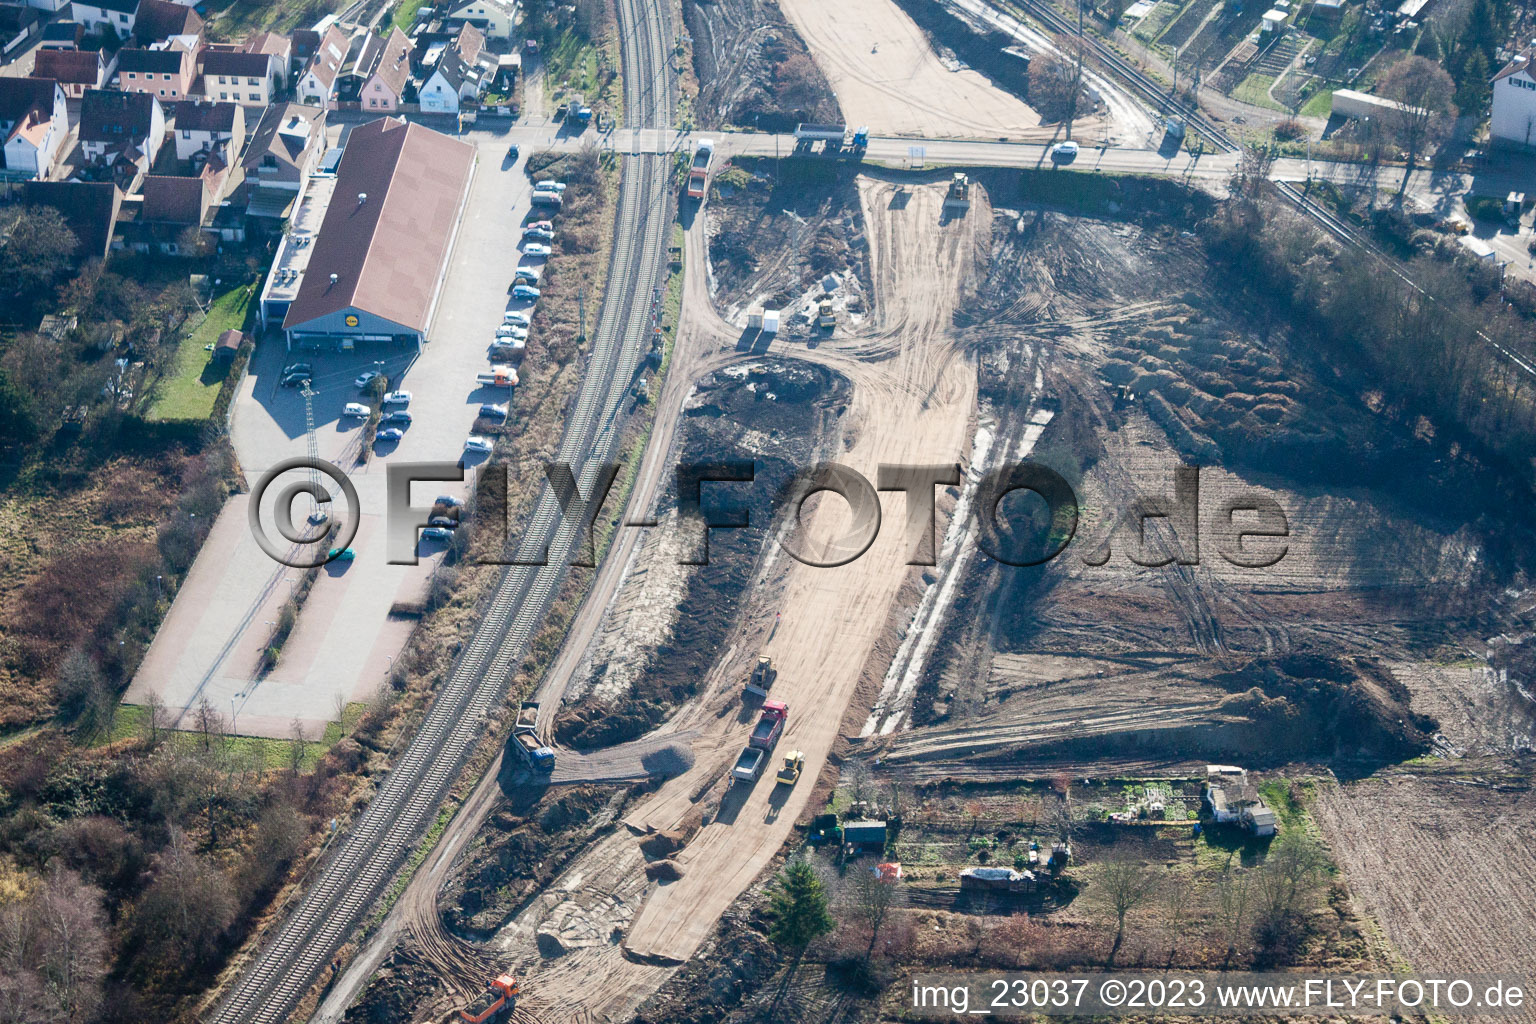 Aerial photograpy of Construction site at the Ottstr railway crossing in Wörth am Rhein in the state Rhineland-Palatinate, Germany